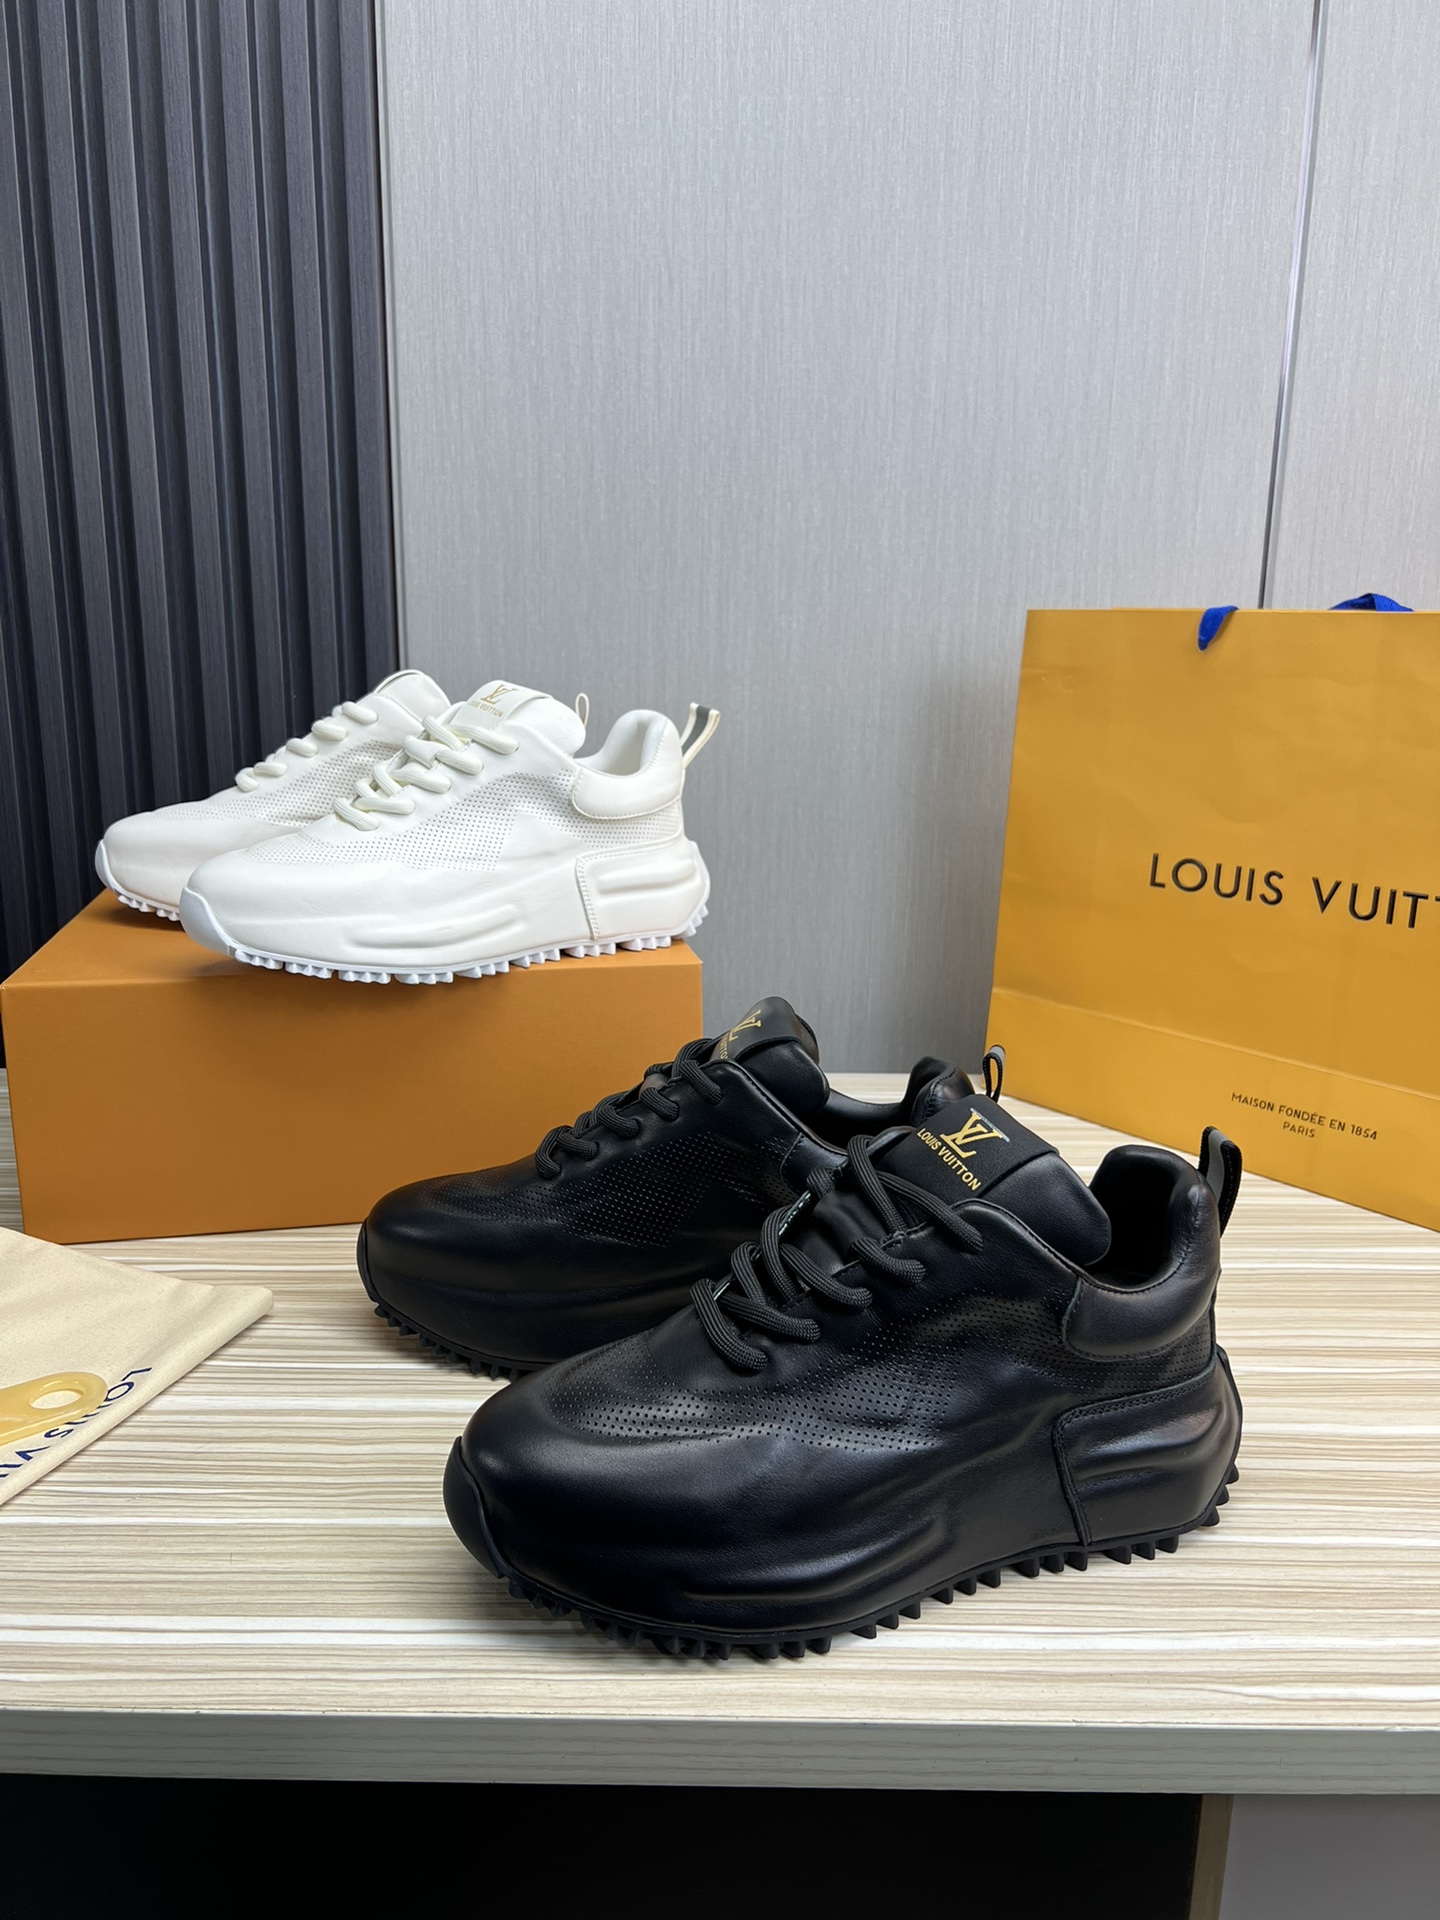 Louis Vuitton Shoes Sneakers Cowhide Genuine Leather Rubber Fashion